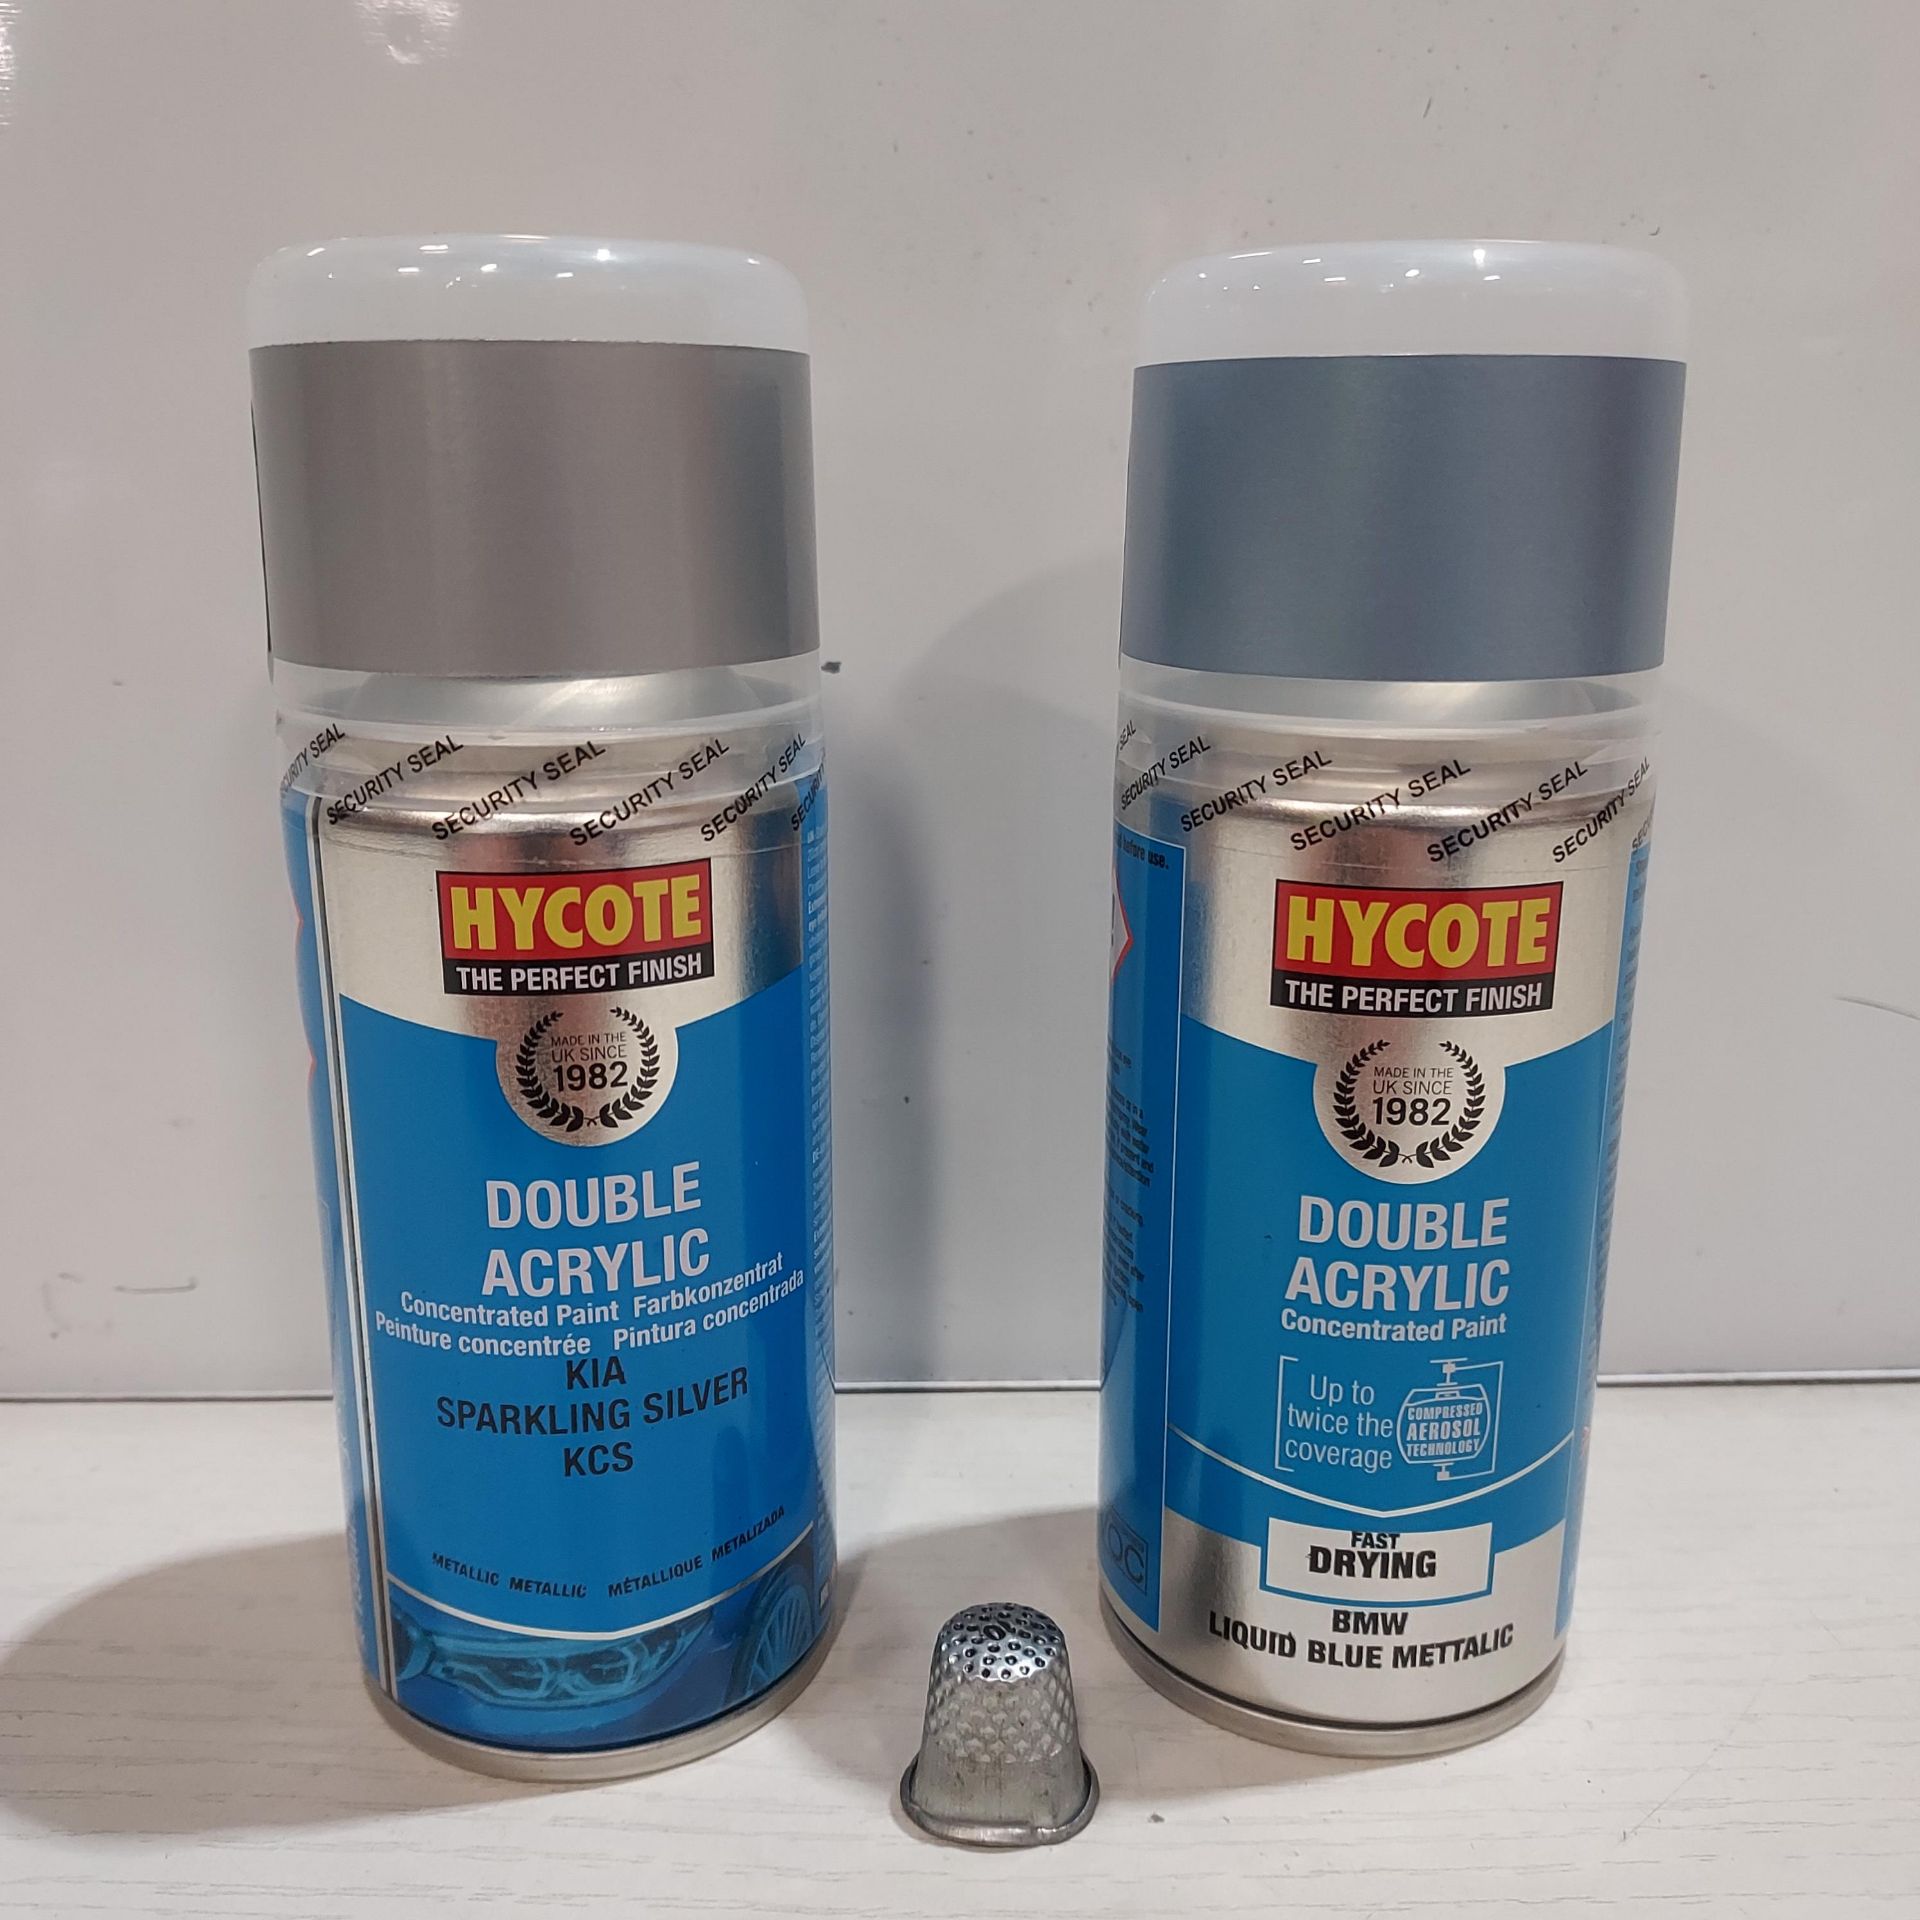 120 X BRAND NEW HYCOTE DOUBLE ACRYLIC CONCENTRATED PAINT IN BMW LIQUID BLUE METALIC - KIA